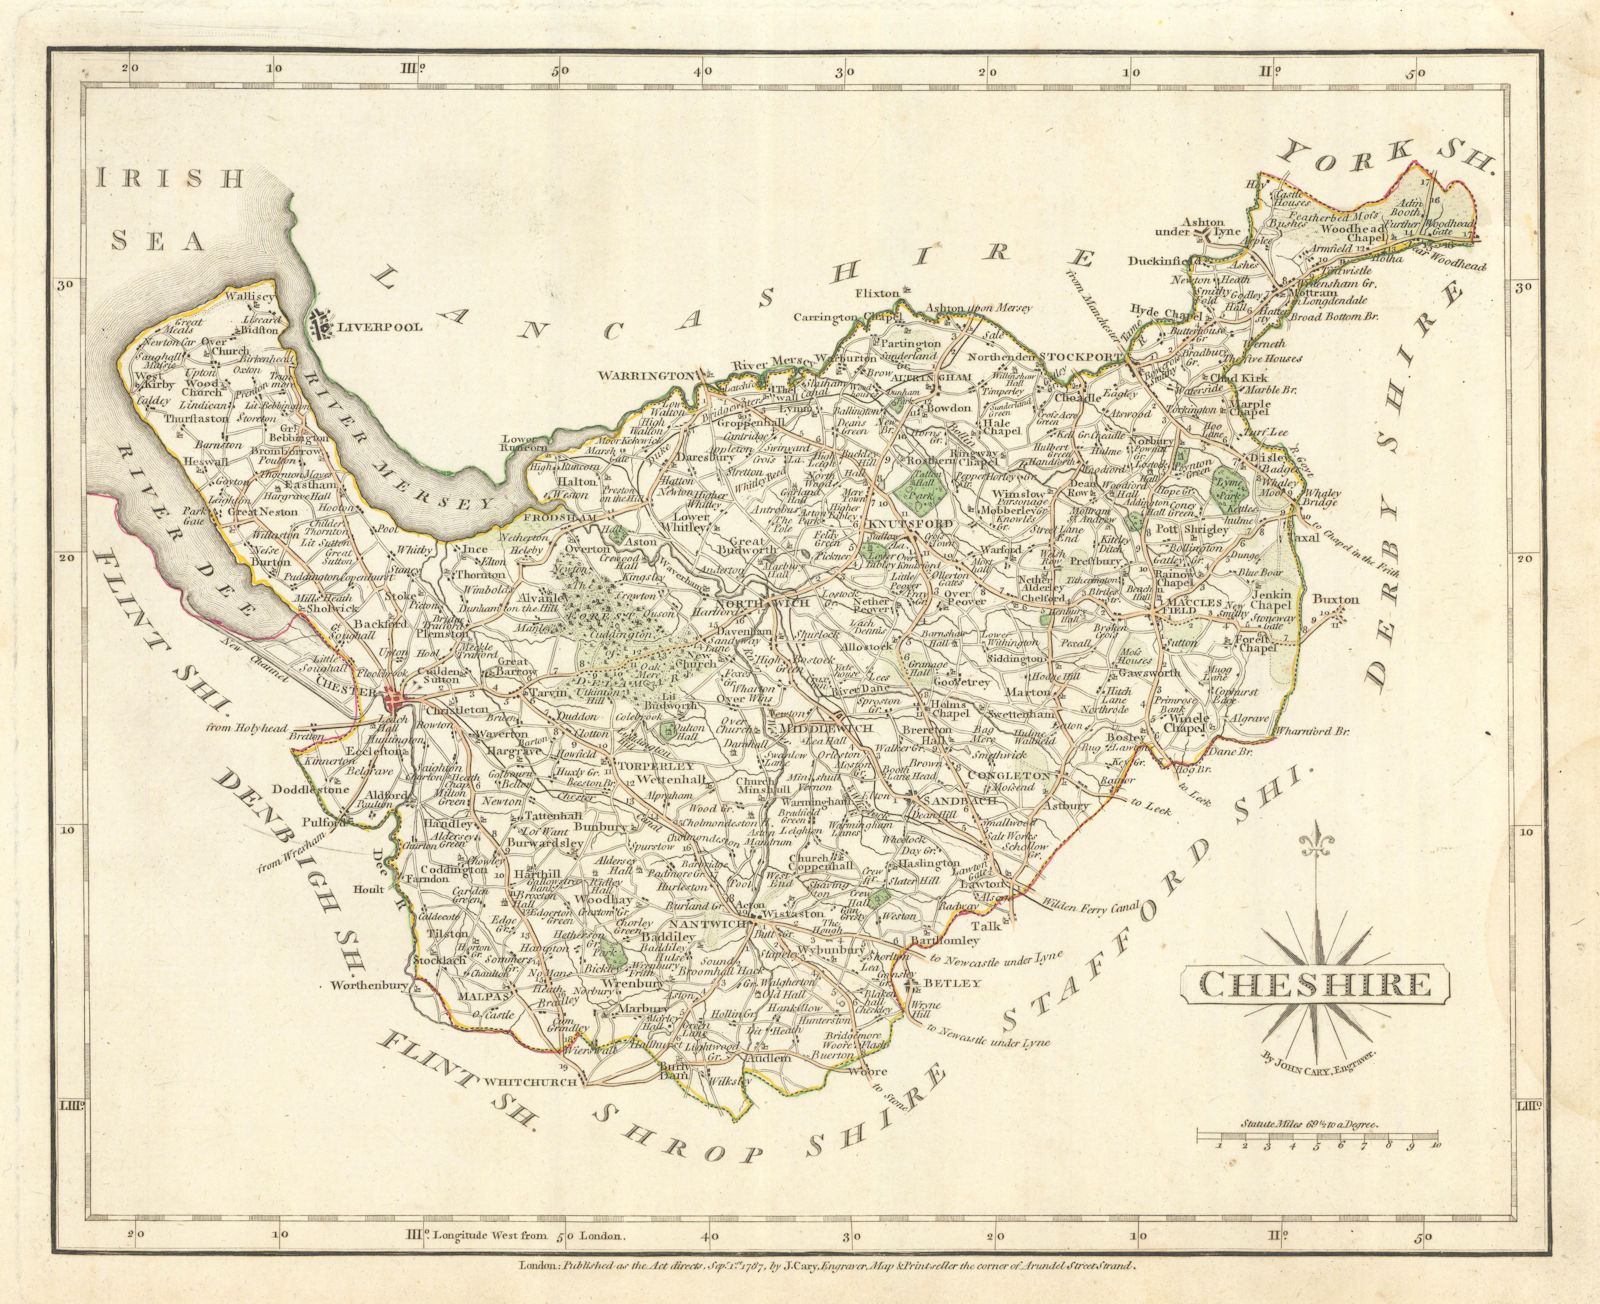 Antique county map of CHESHIRE by JOHN CARY. Original outline colour 1793